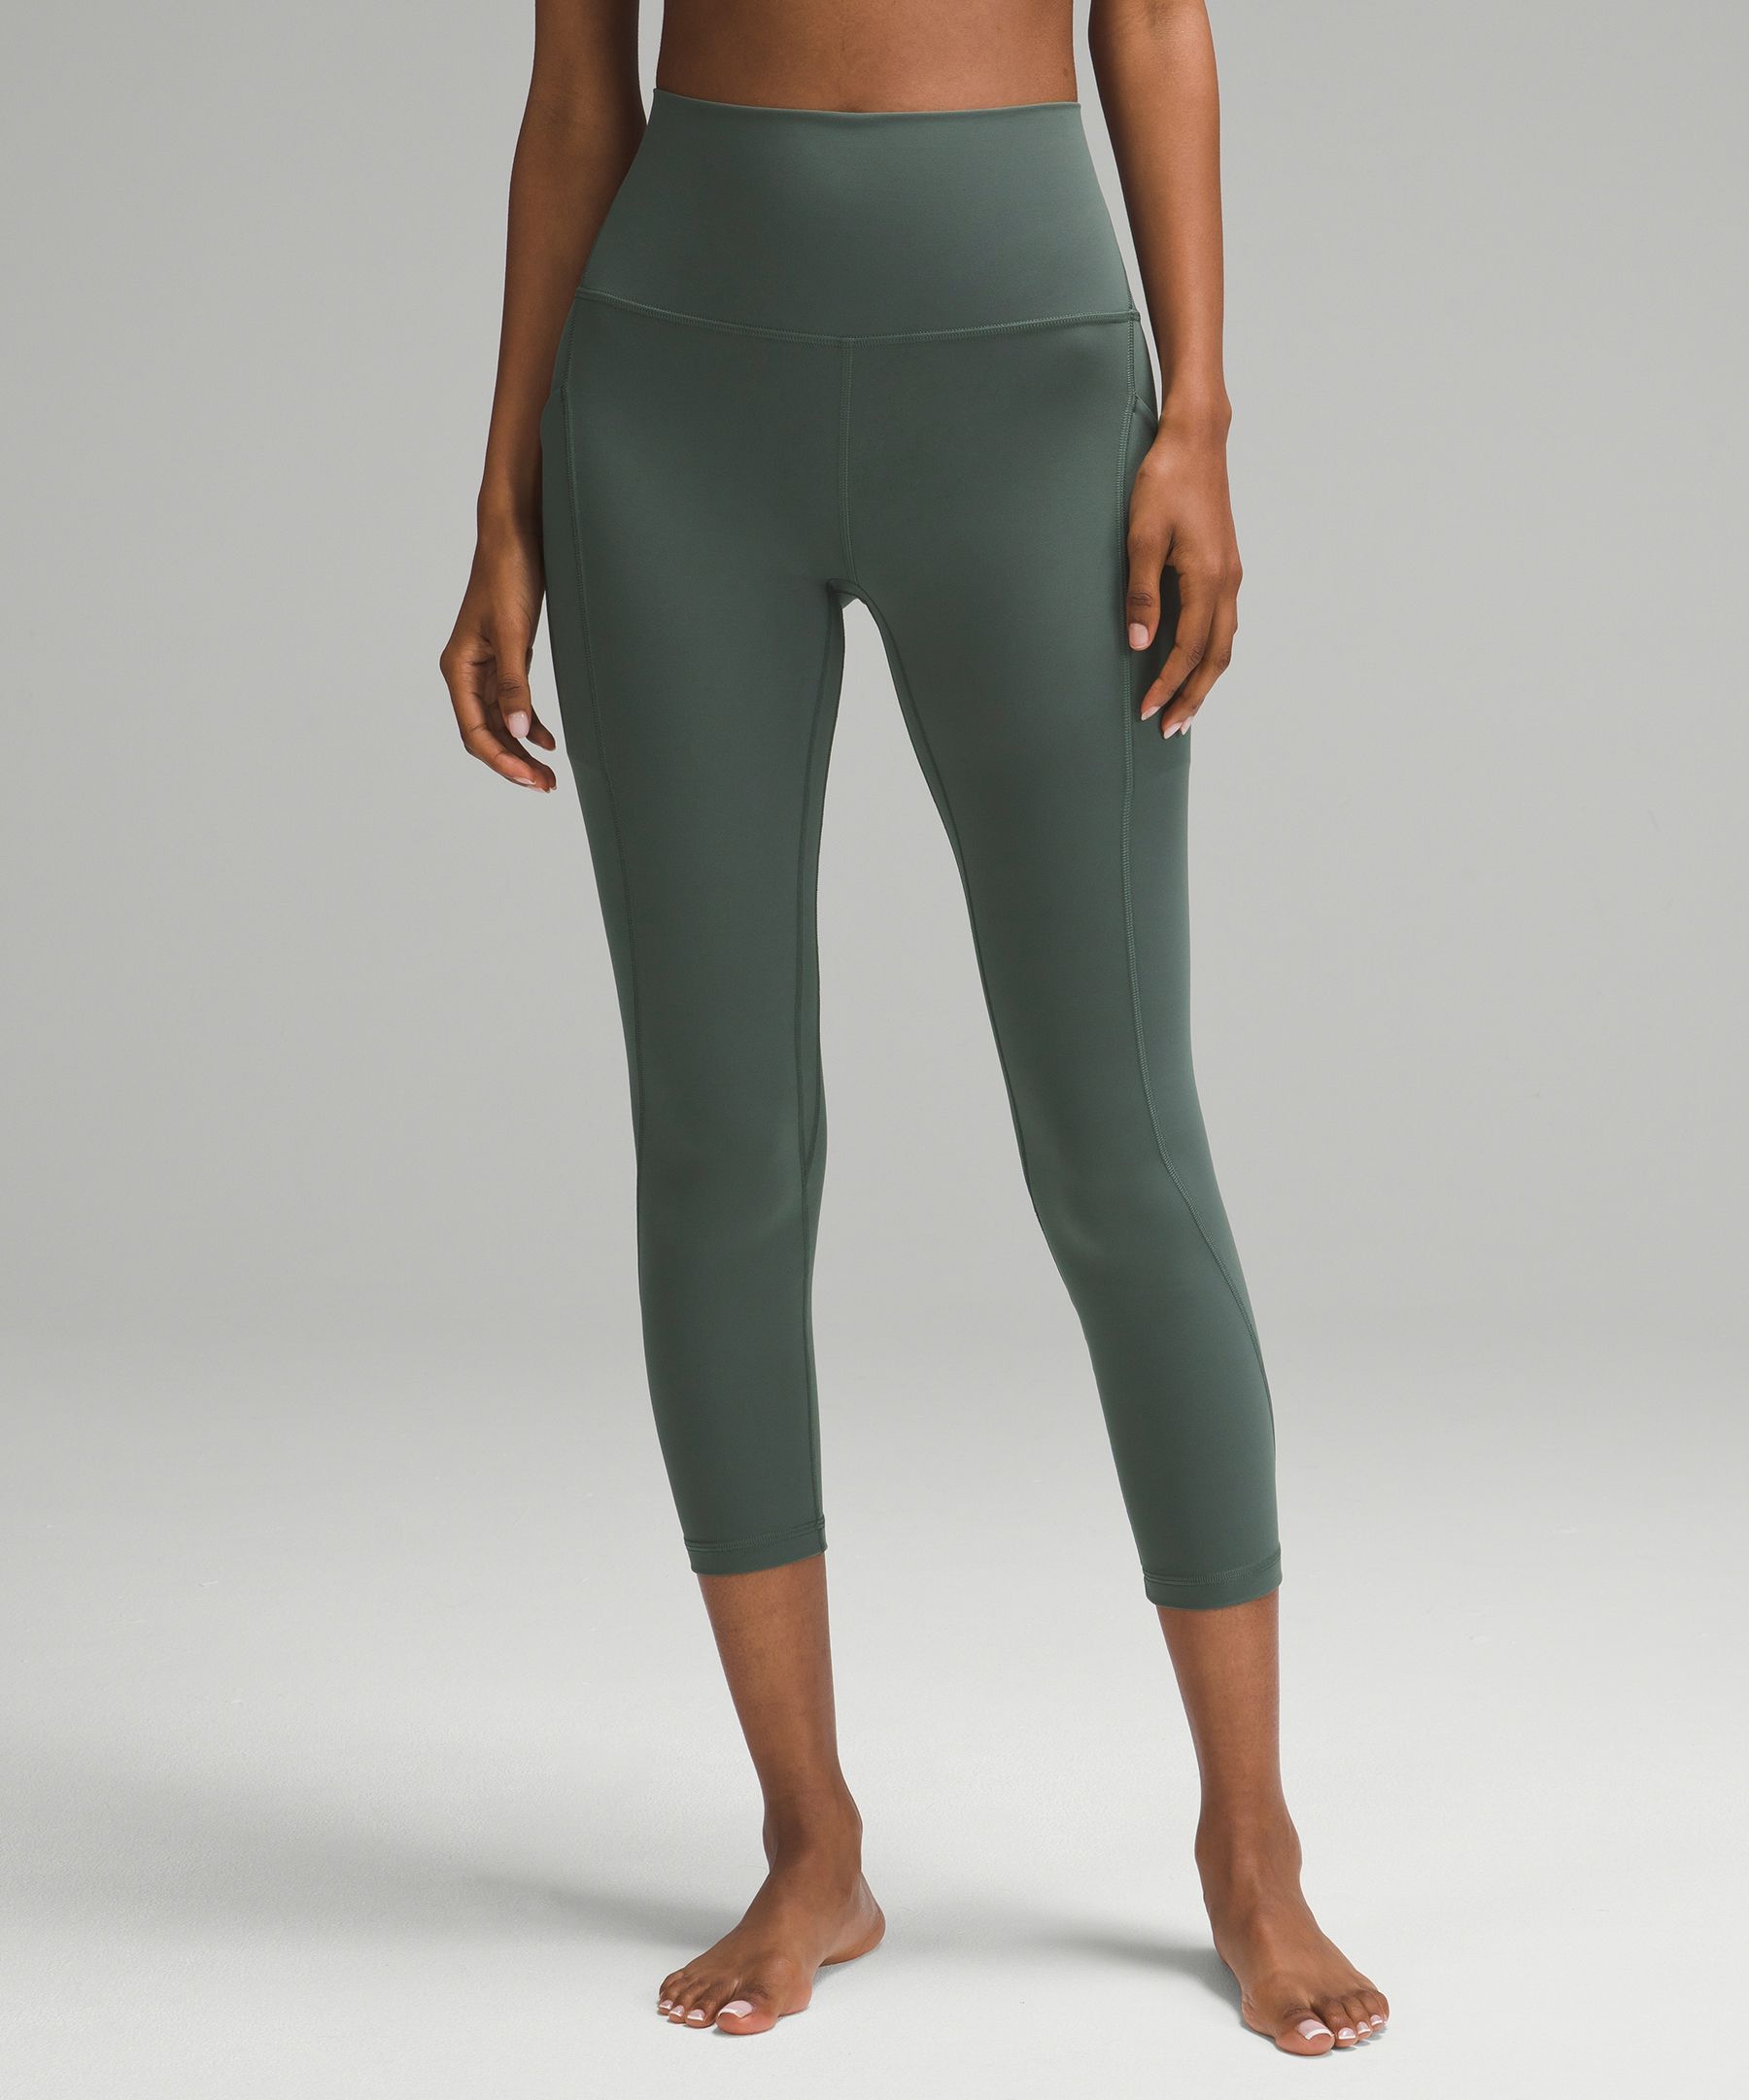 New AUTH Lululemon Wunder Under Crop High-Rise Roll Down Scallop